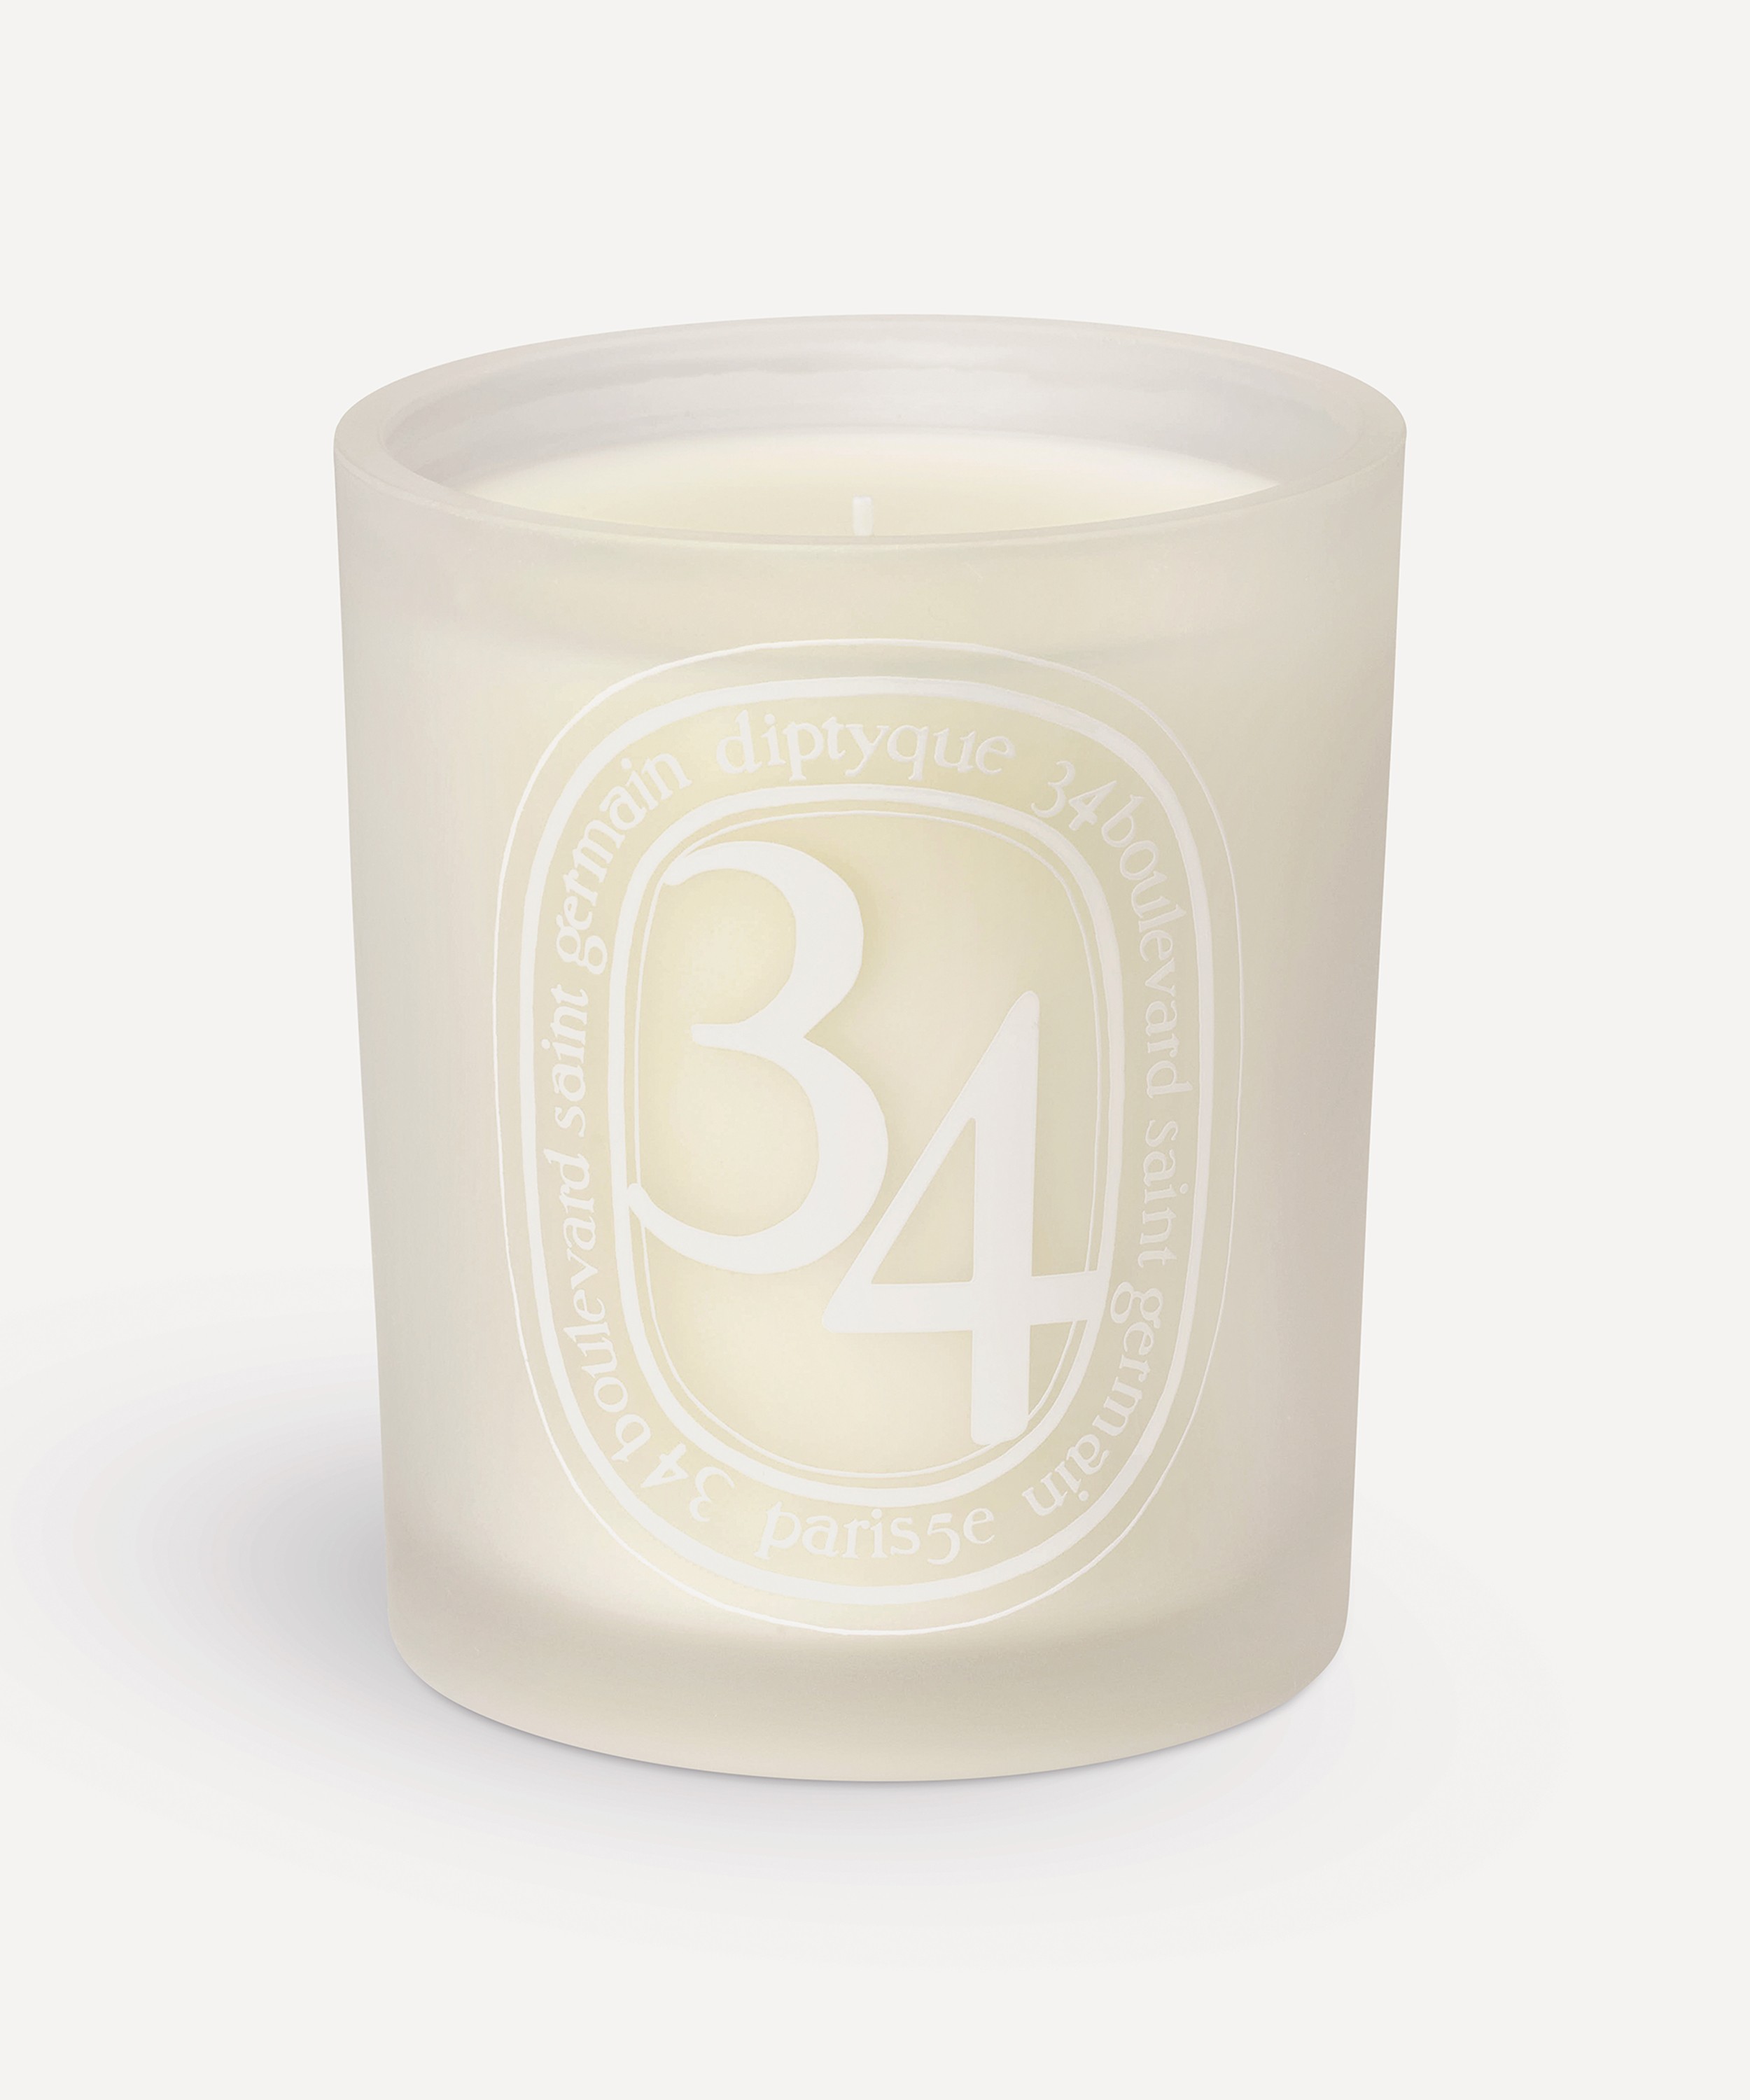 Diptyque - 34 Boulevard Saint Germain Scented Candle 300g image number 0